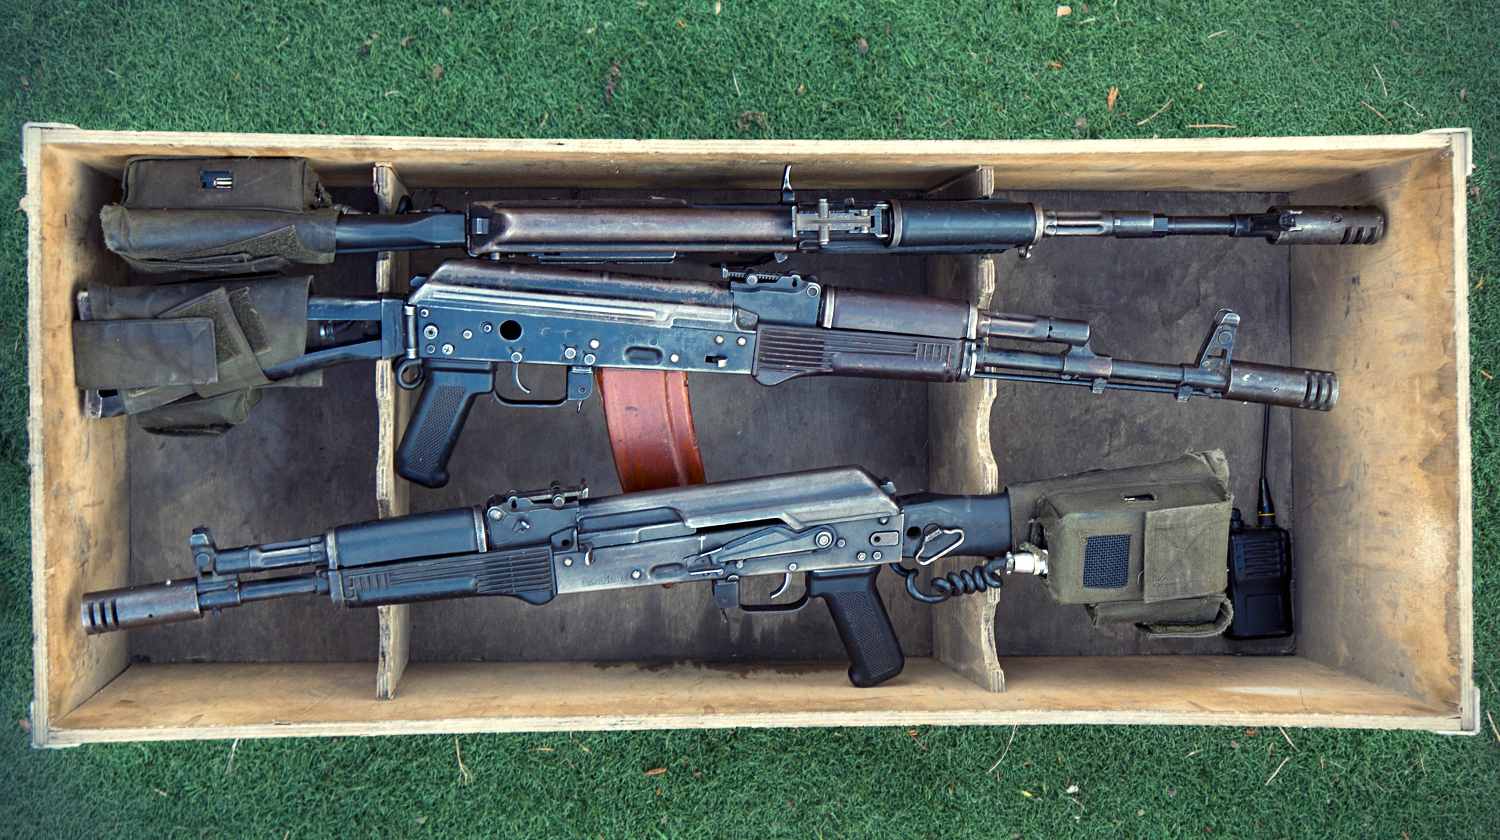 Feature | Assault rifles in a wooden box | DIY Gun Safes: How To Hide Your Weapons In Plain Sight